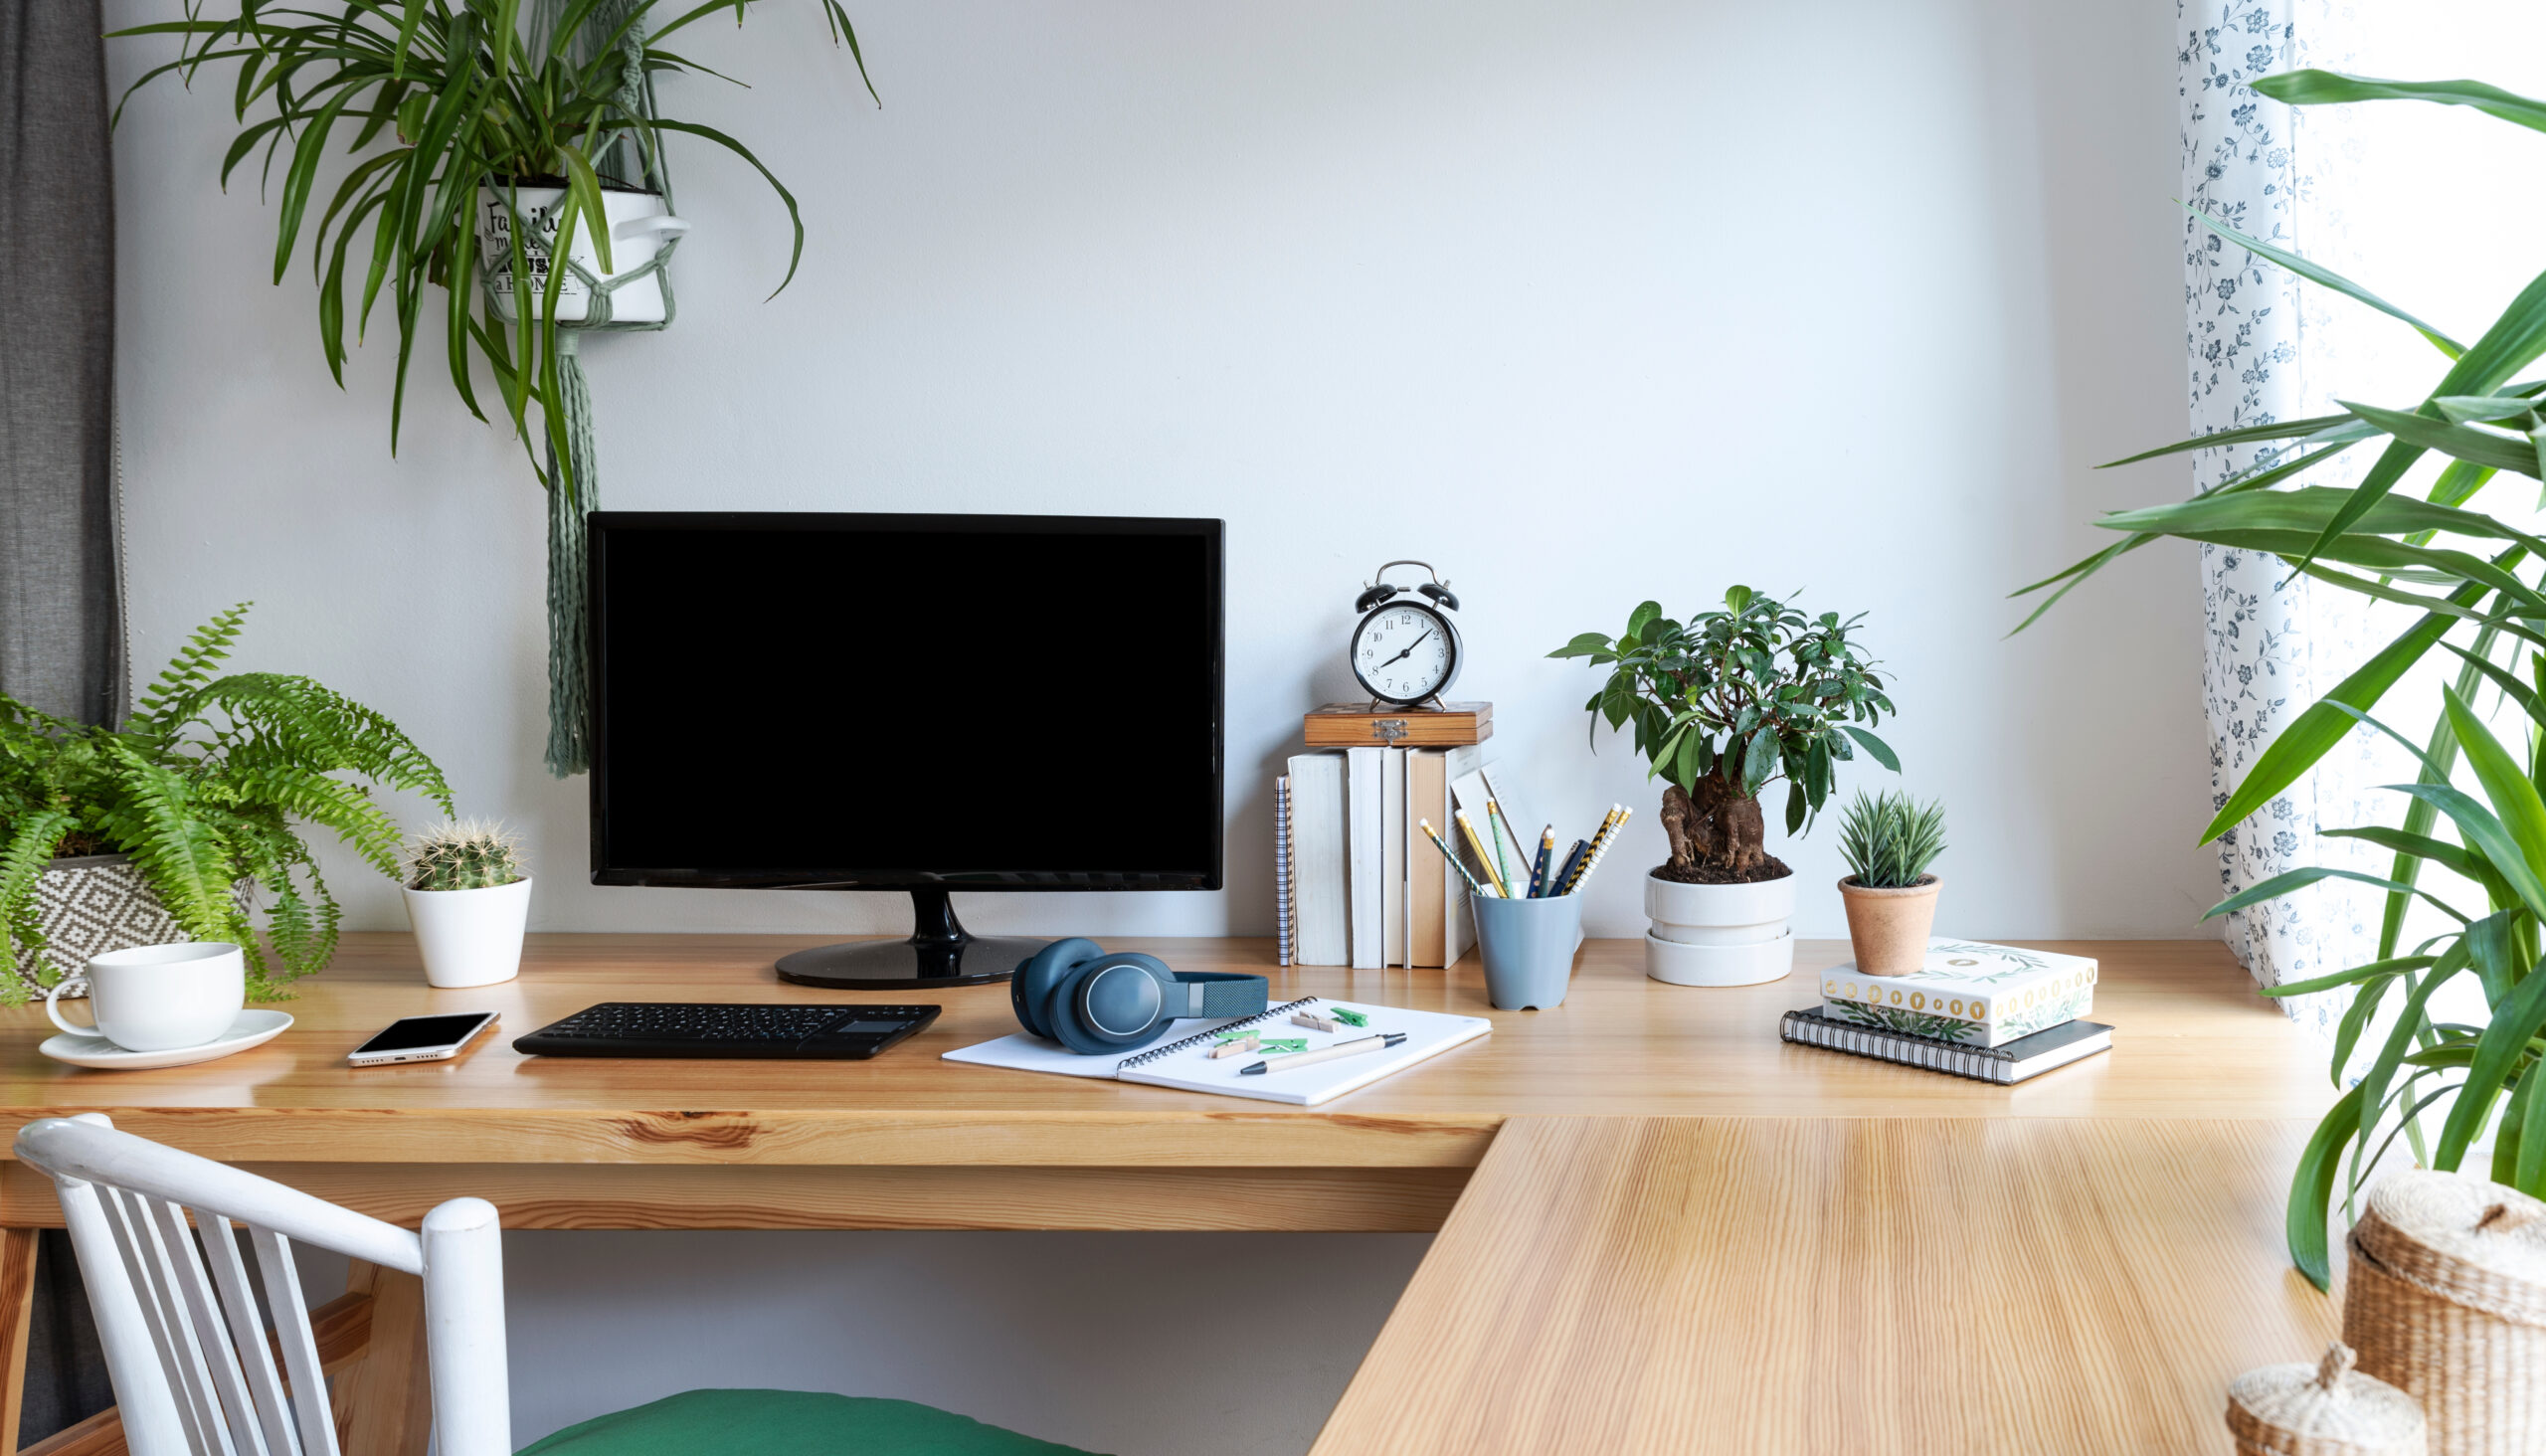 Desk covered in plants and other desk accessories